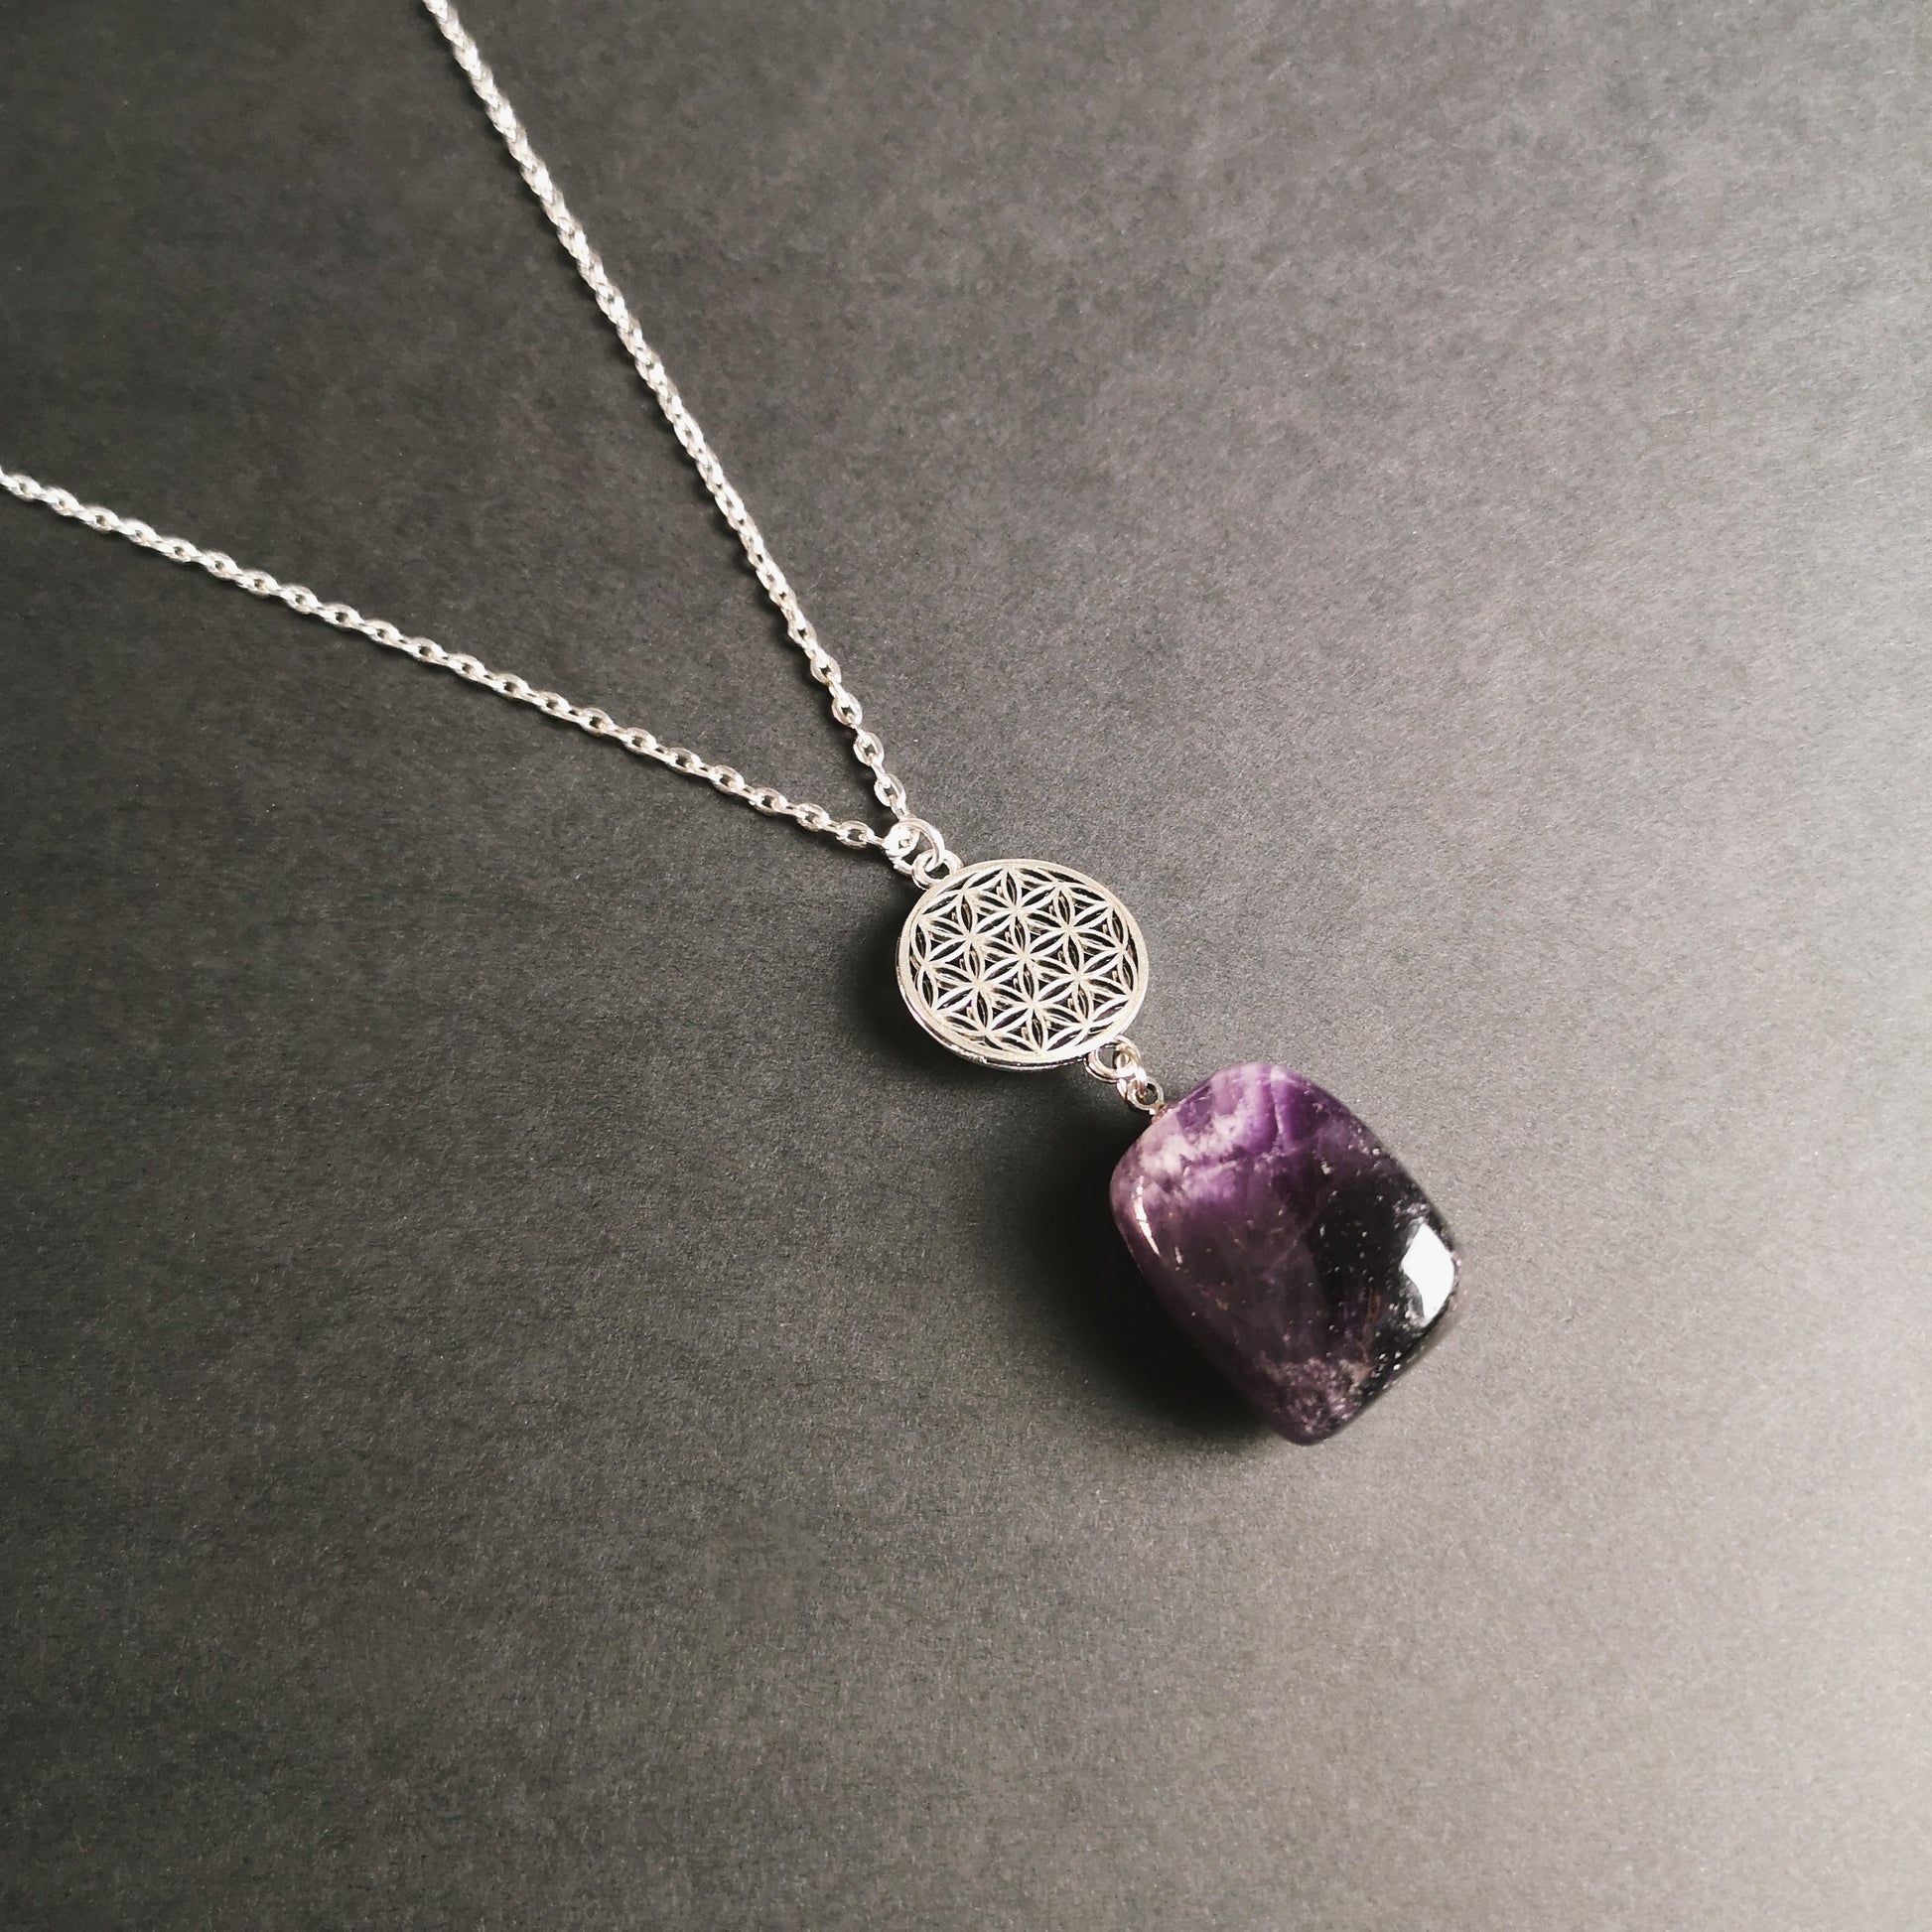 Flower of life and amethyst gemstone spiritual necklace Baguette Magick